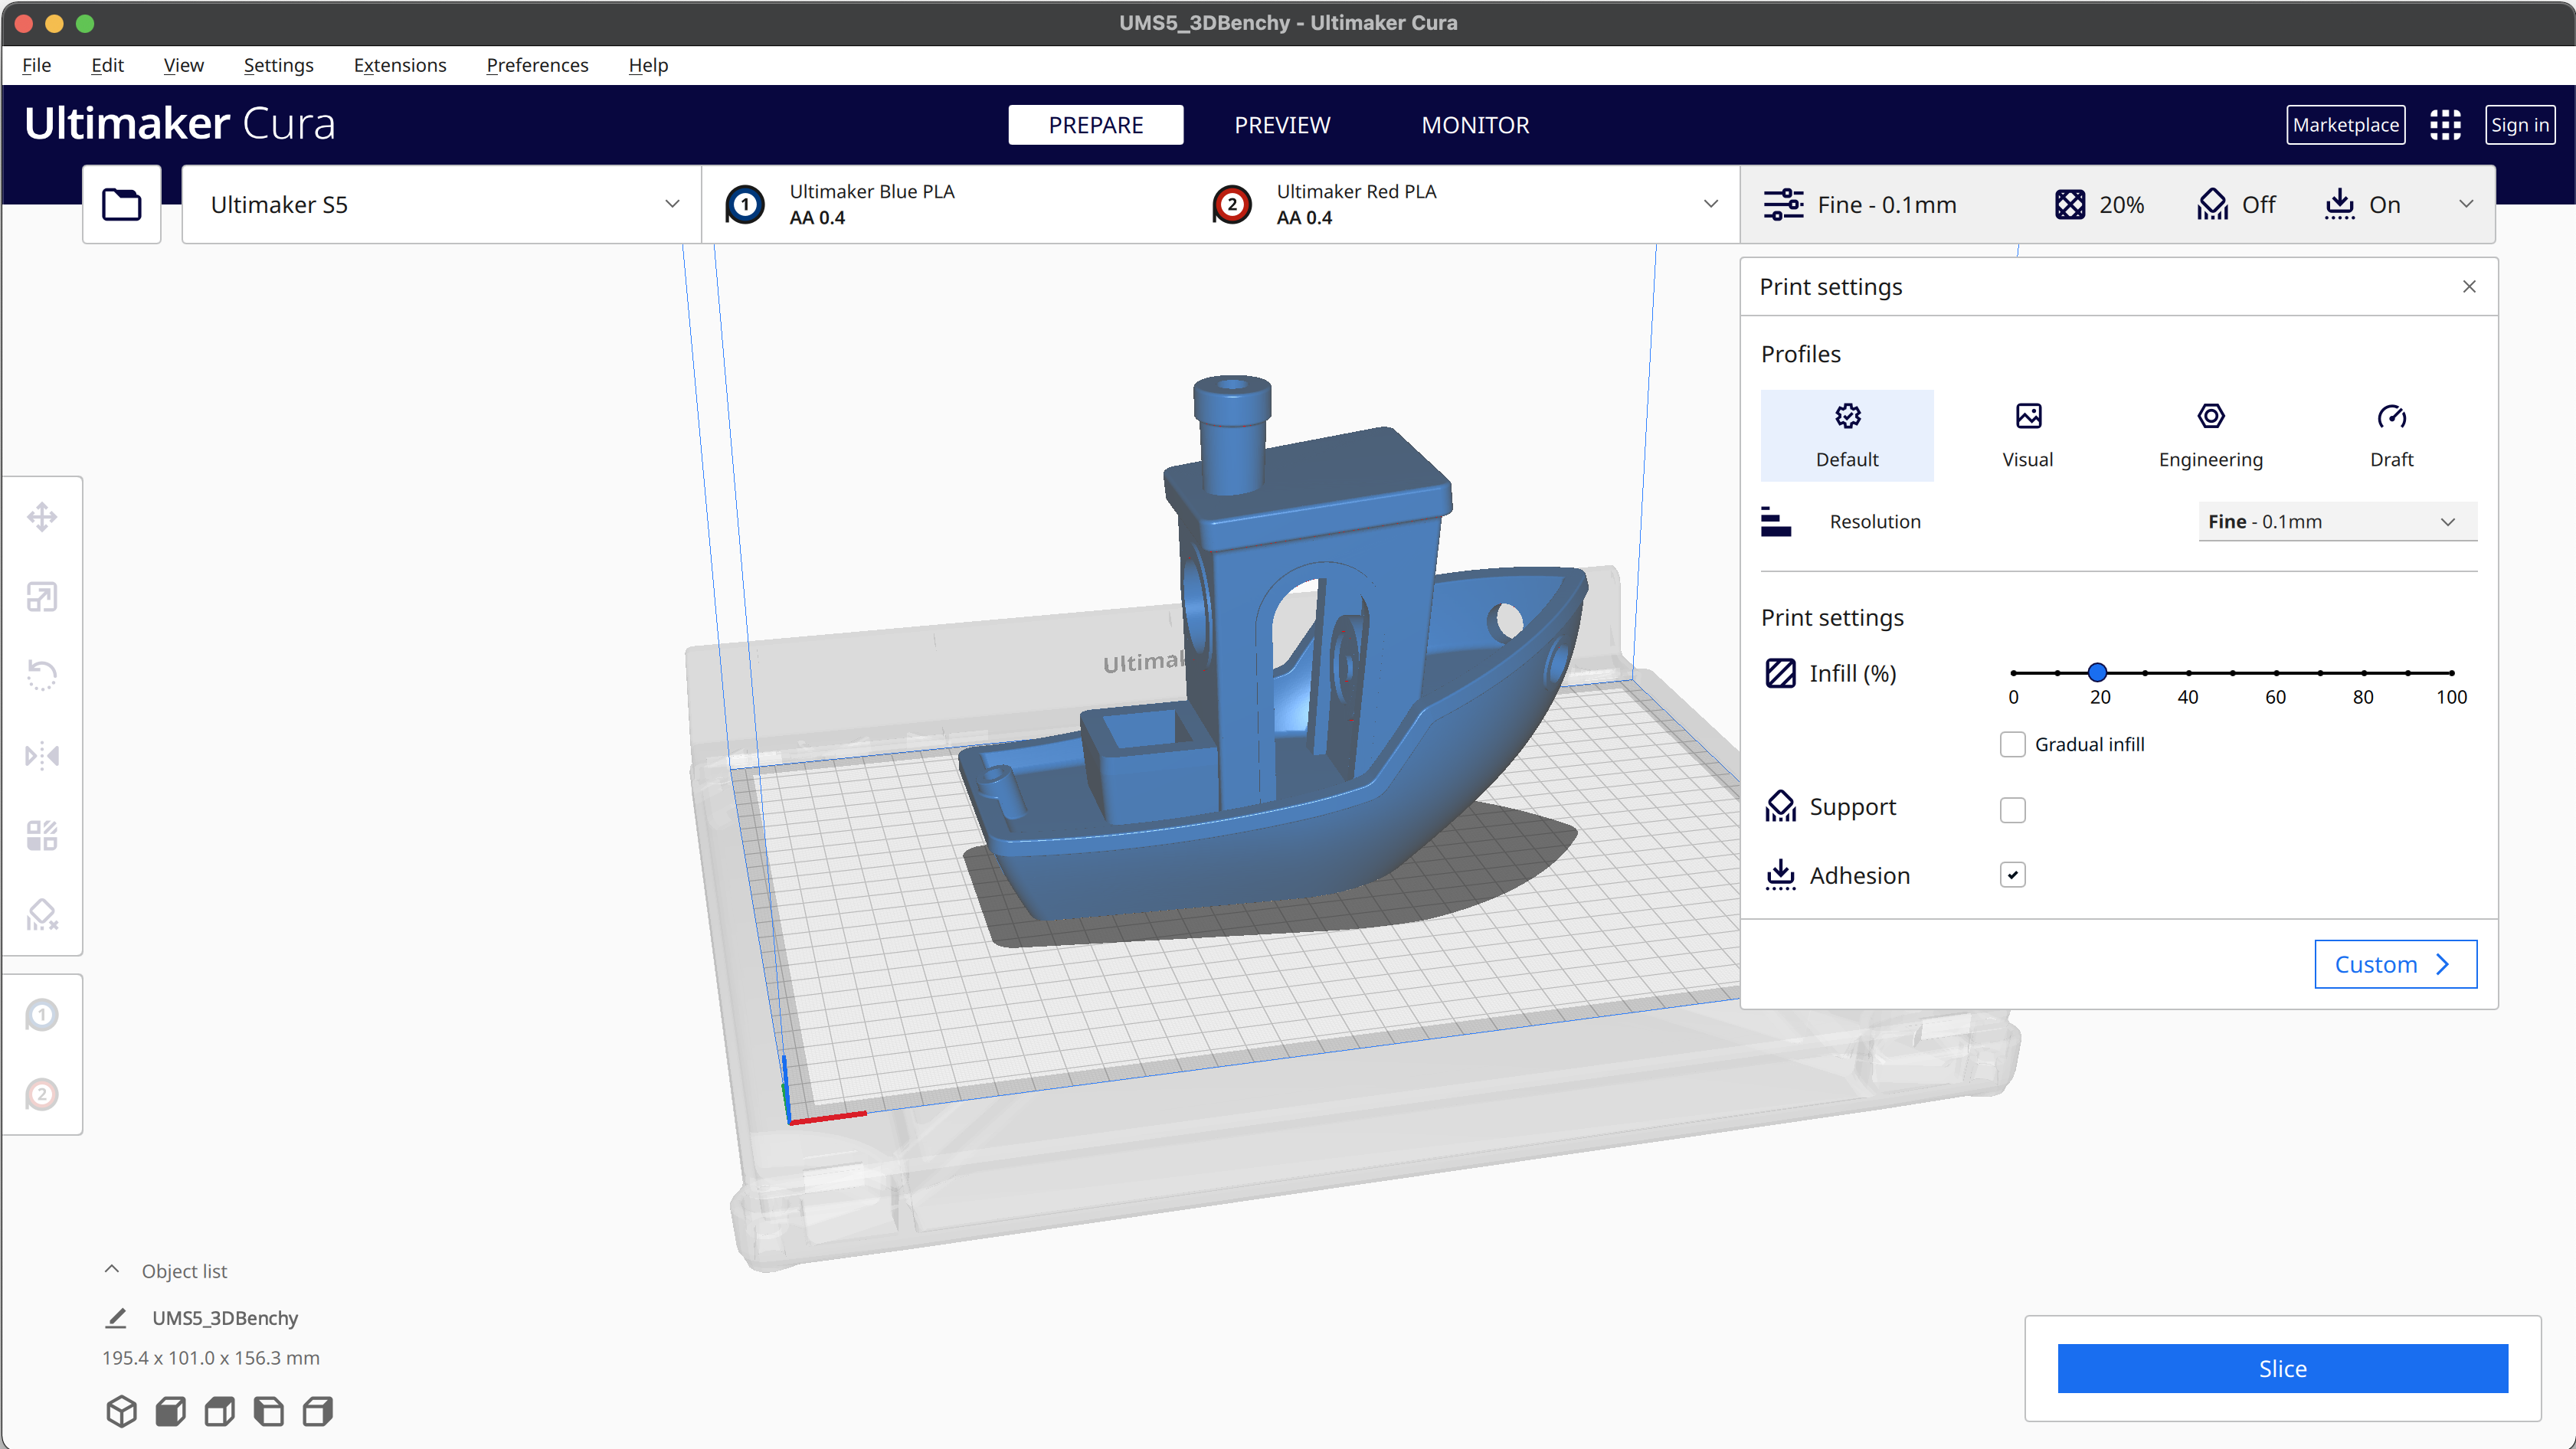 Shows cura open on the preview screen with a large benchy model in the center.